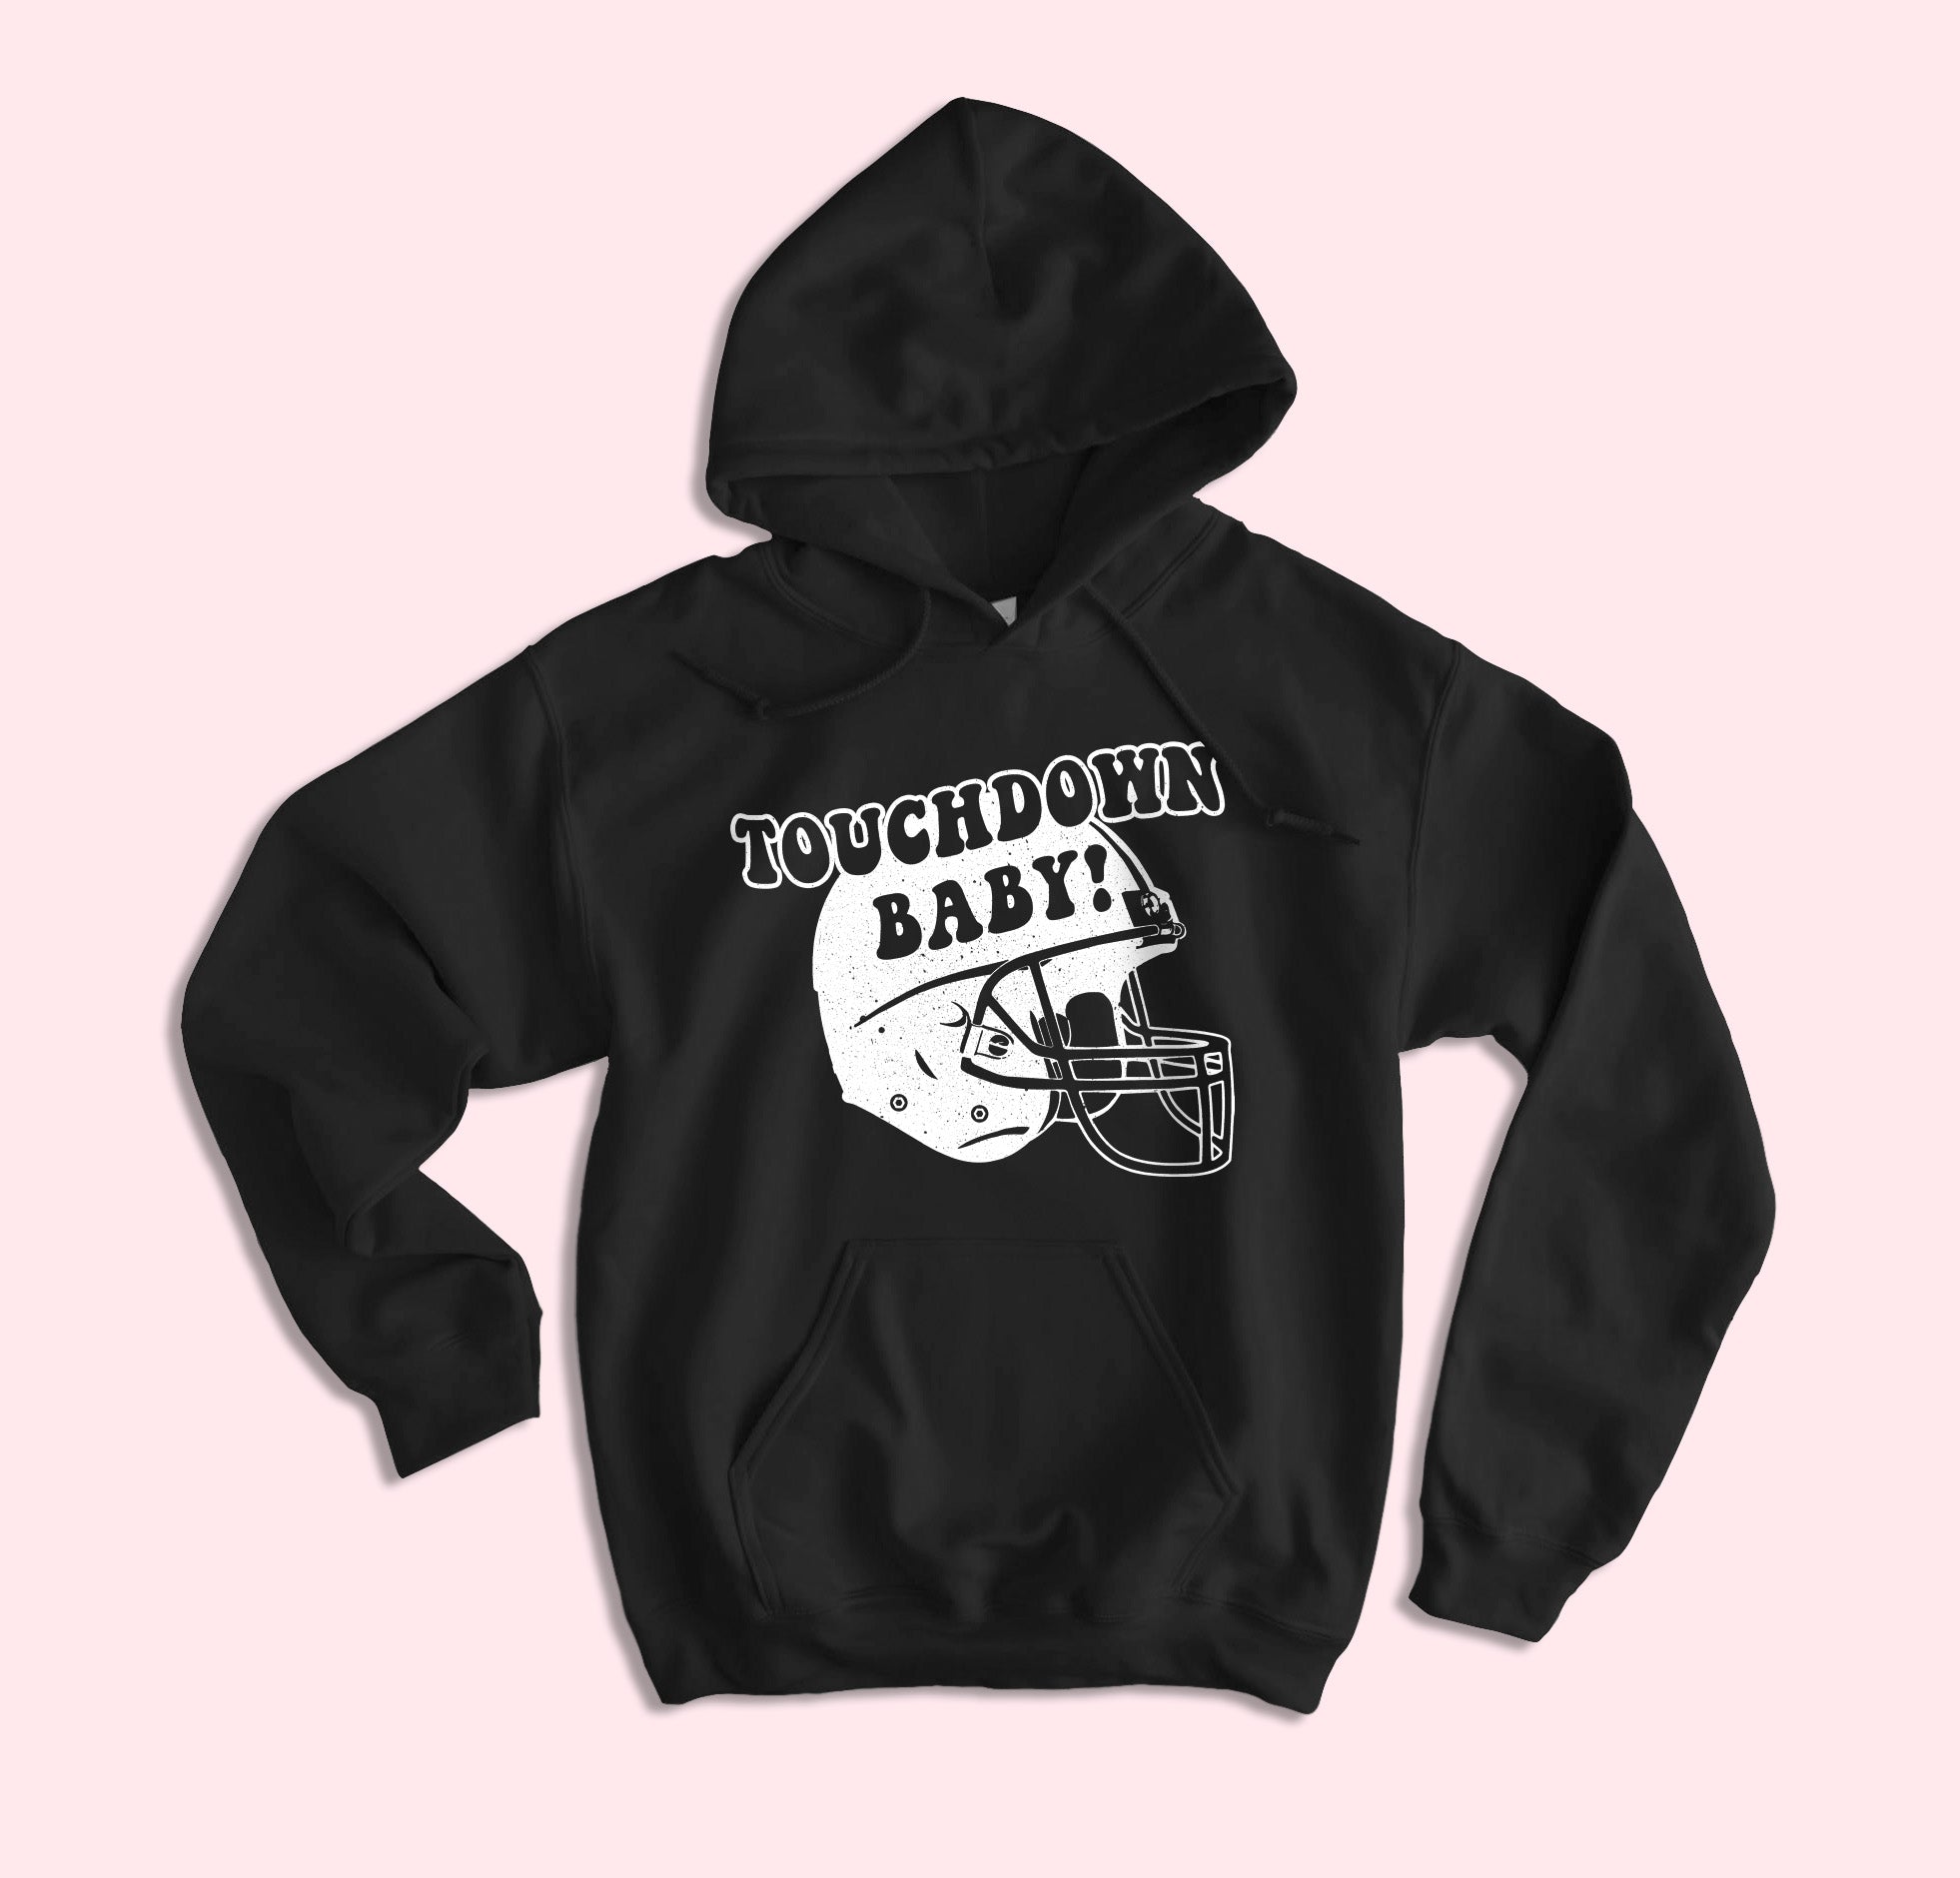 Black hoodie with football helmet that says touchdown baby - HighCiti